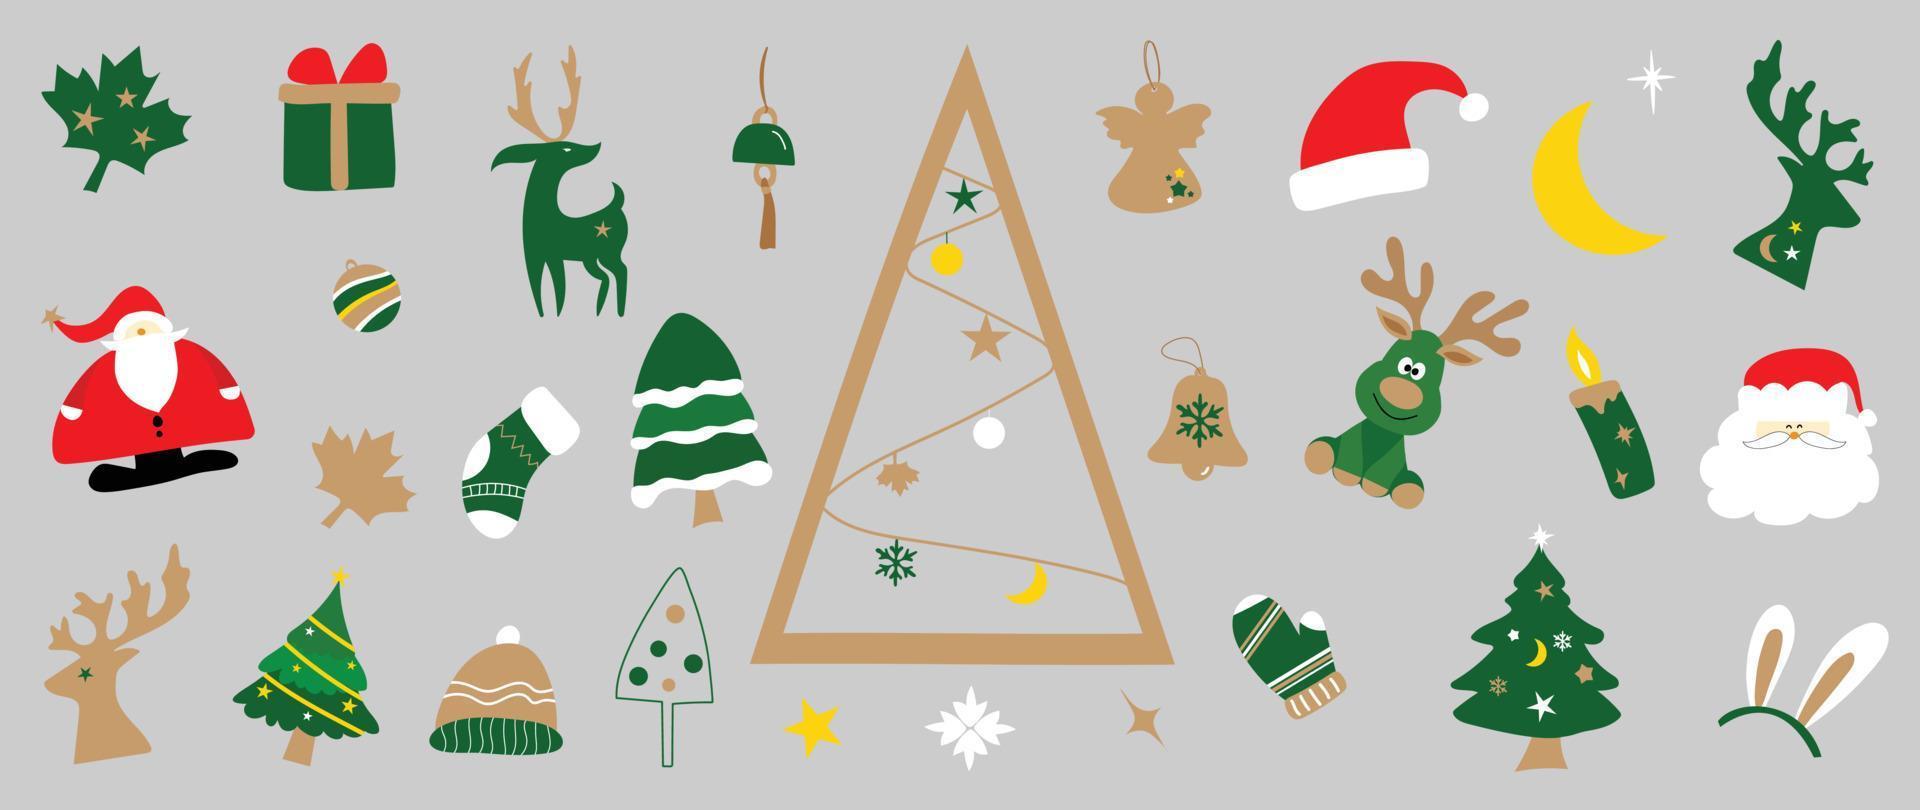 Set of christmas elements doodle style vector. Collection of decorative christmas tree, santa claus, cute reindeer, present. Design illustration for decoration, card, poster, cover, print, comic. vector